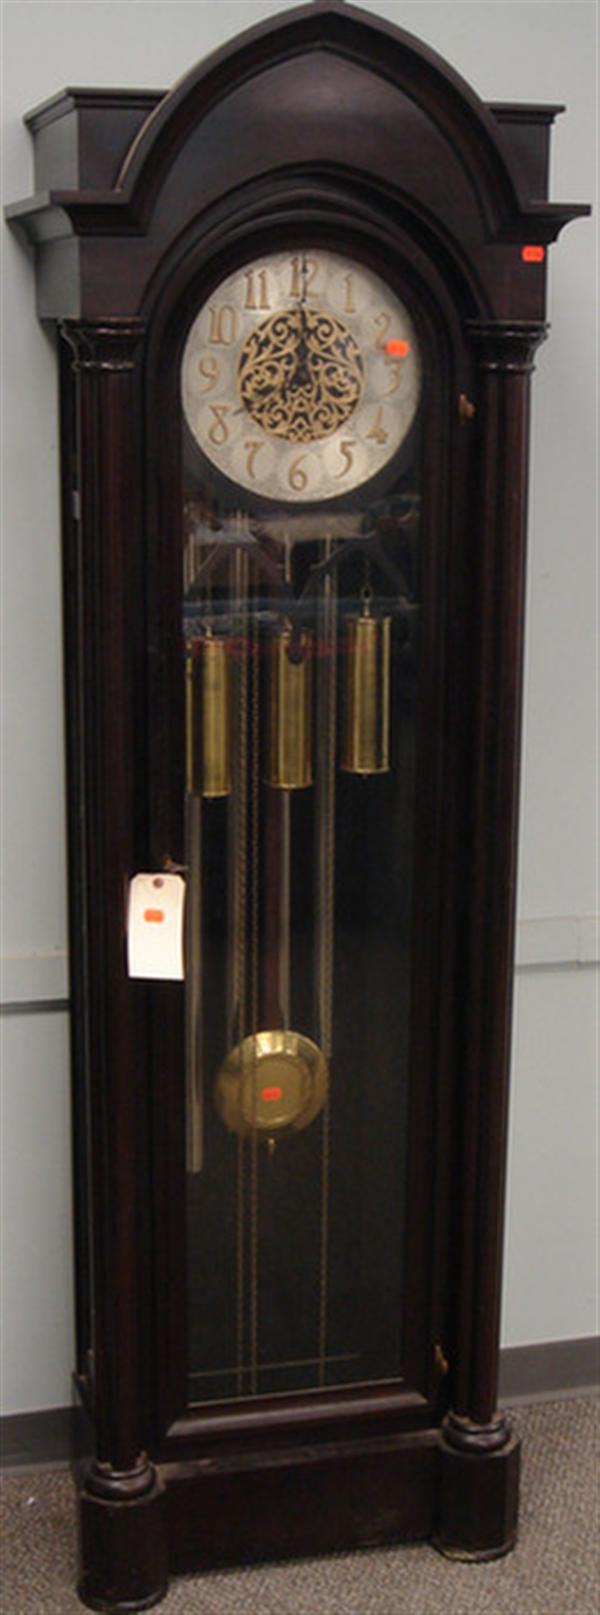 4 tube wire chime hall clock by 3b988